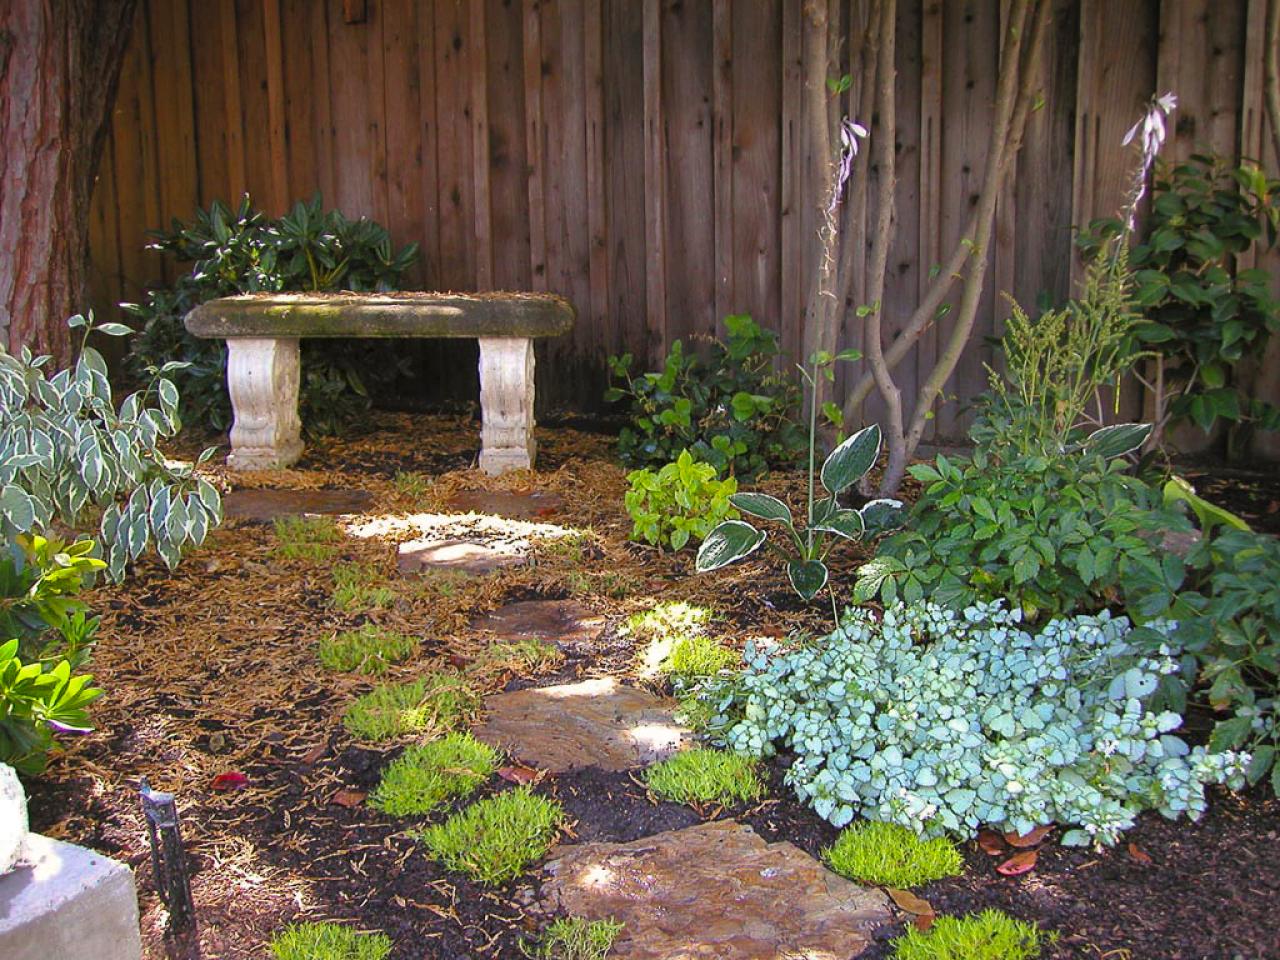 meditate in style in this garden a simple stone bench provides a place 